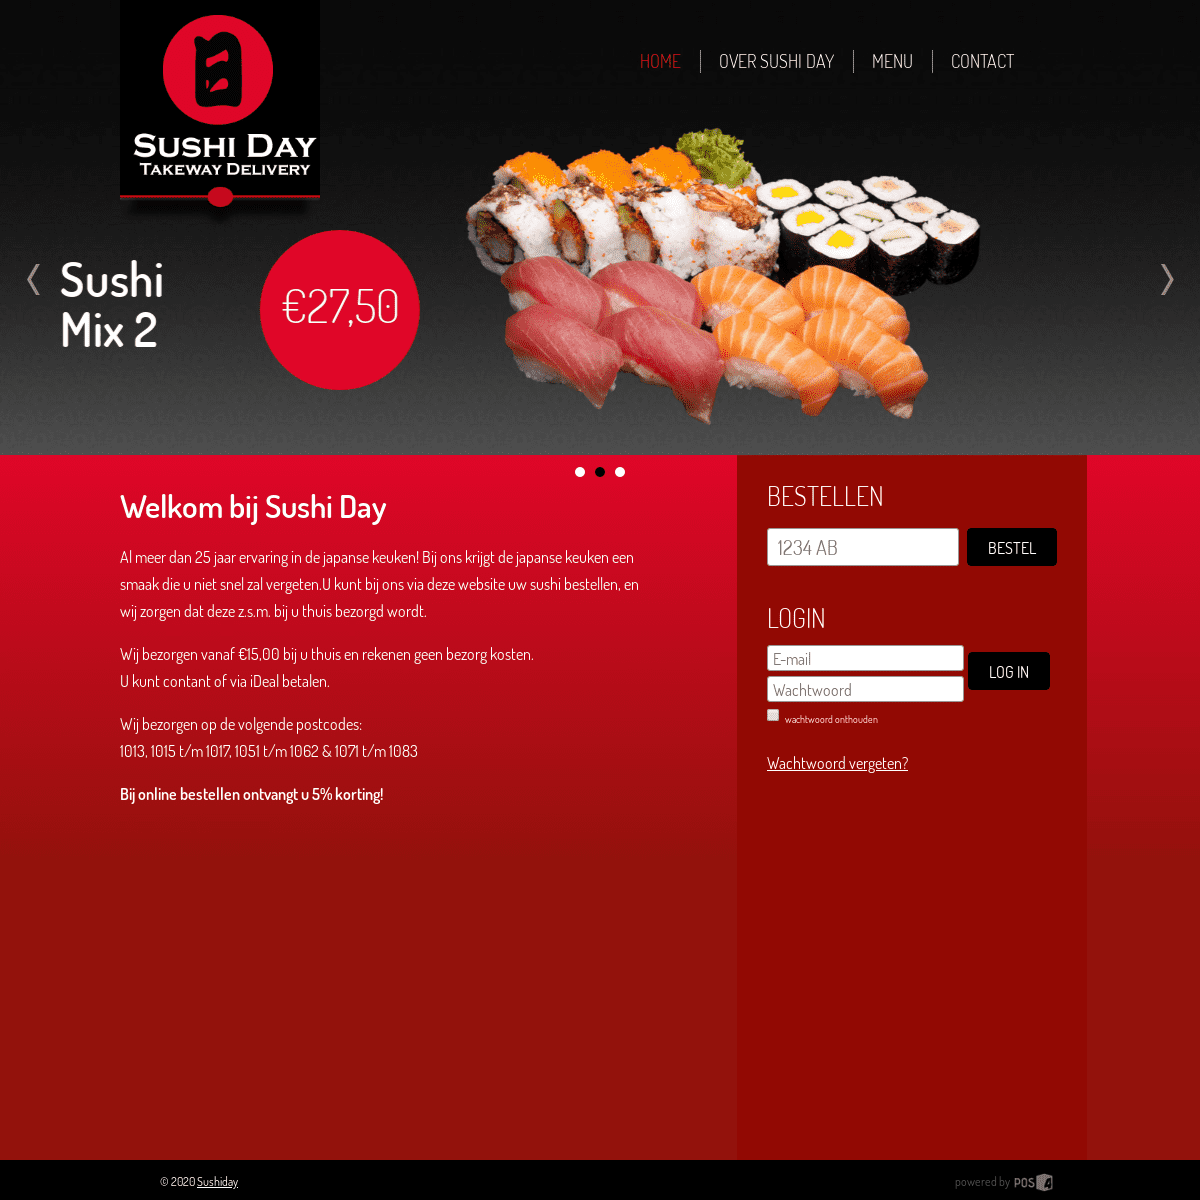 A complete backup of sushiday.nl